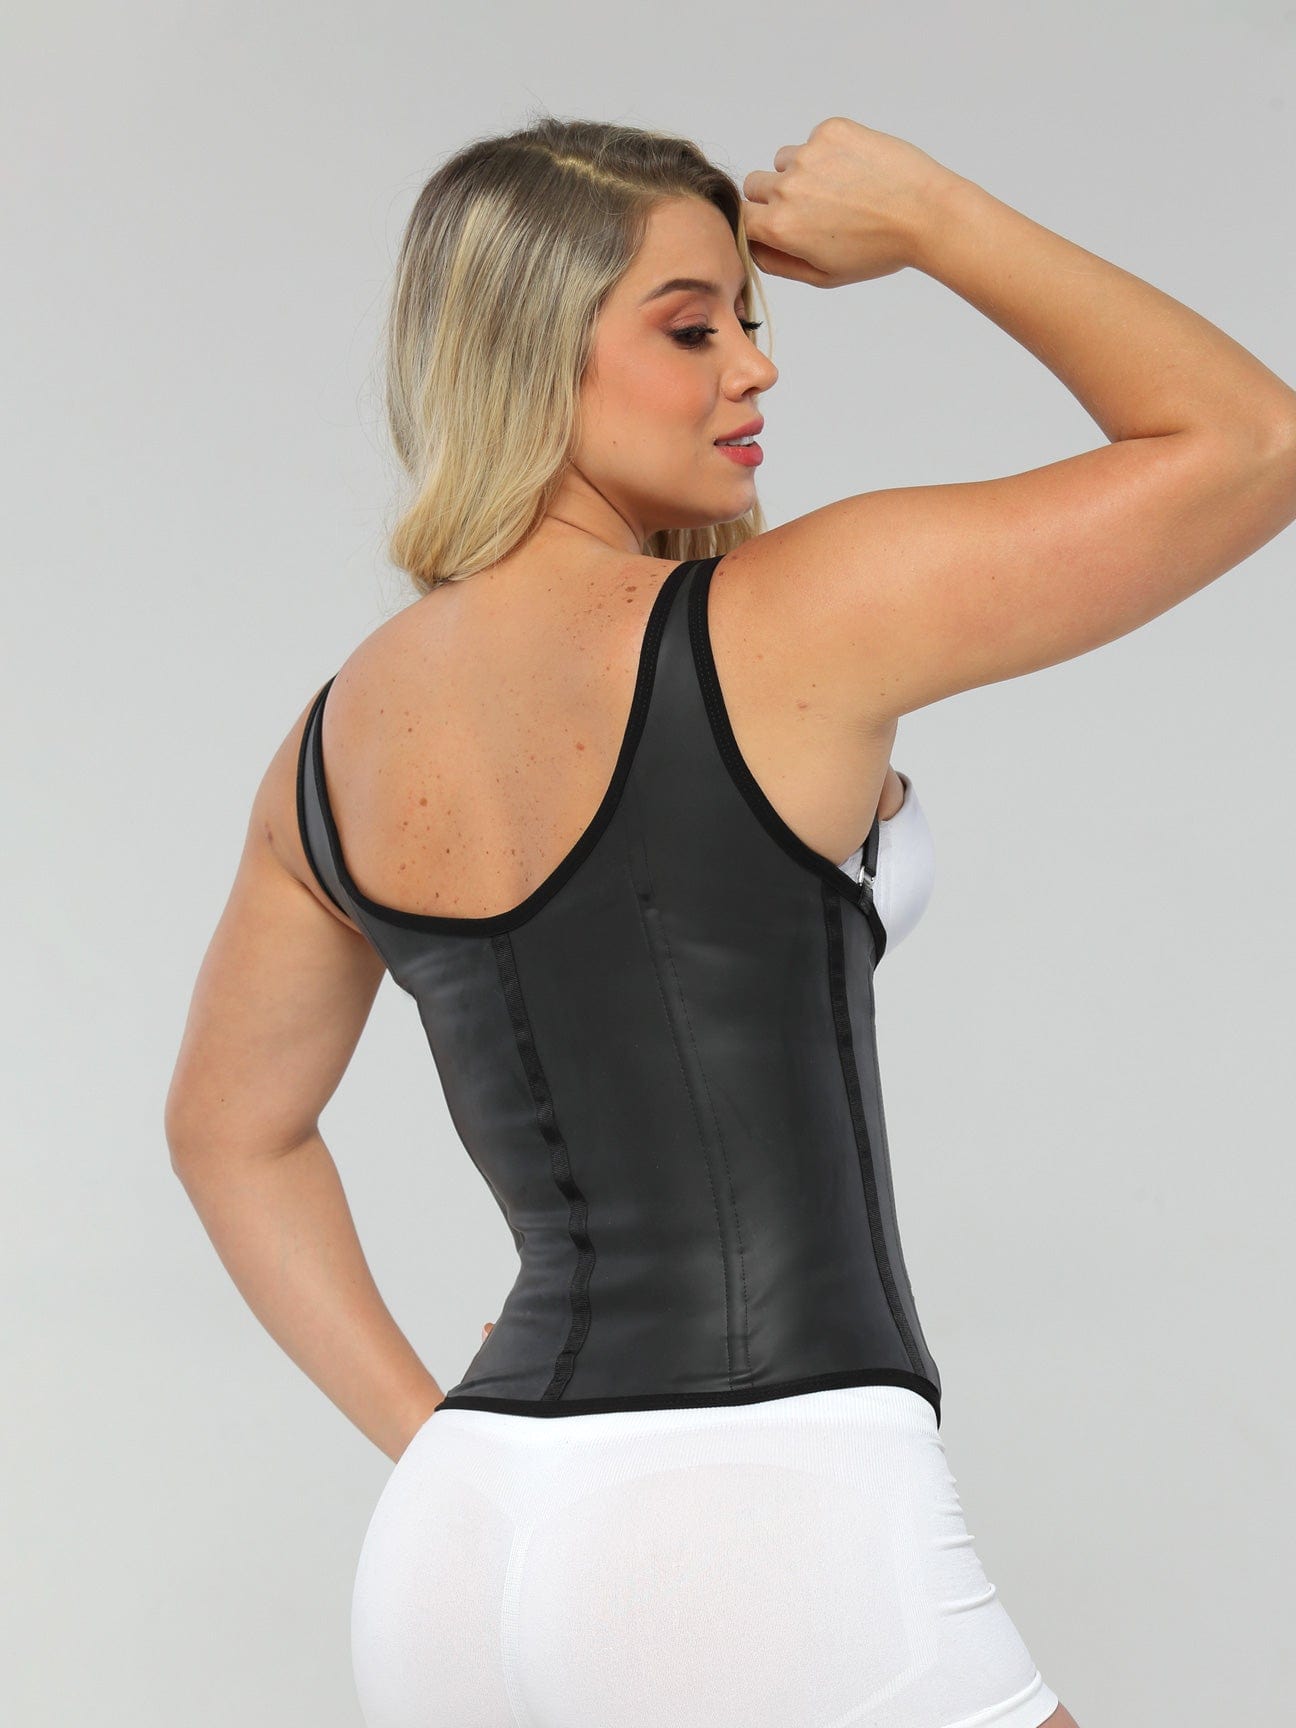 Colombian Waist Trainer Corset For Women Slimming Waist Training Corset  With Sweat Belt For Body Shaping And Reductive Shapewear YAGIMI 20122254p  From Ai828, $24.37